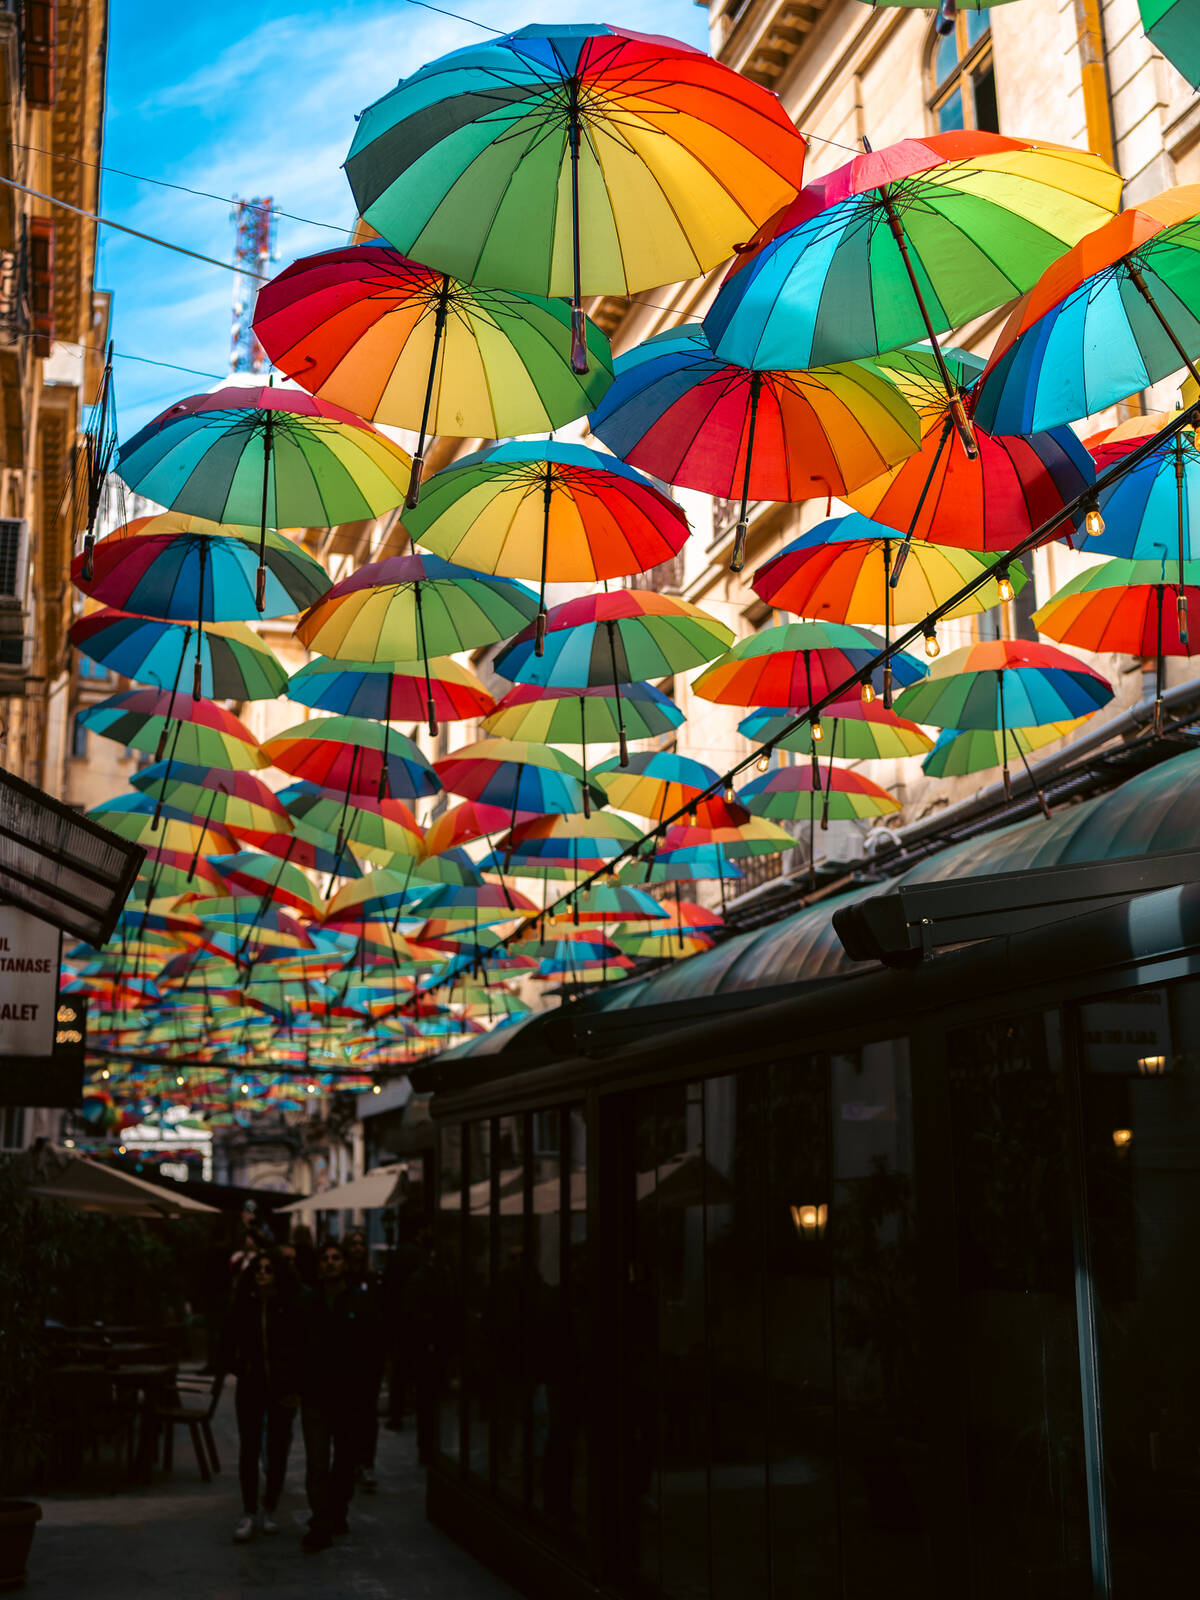 Image of Umbrella Passage by James Billings.